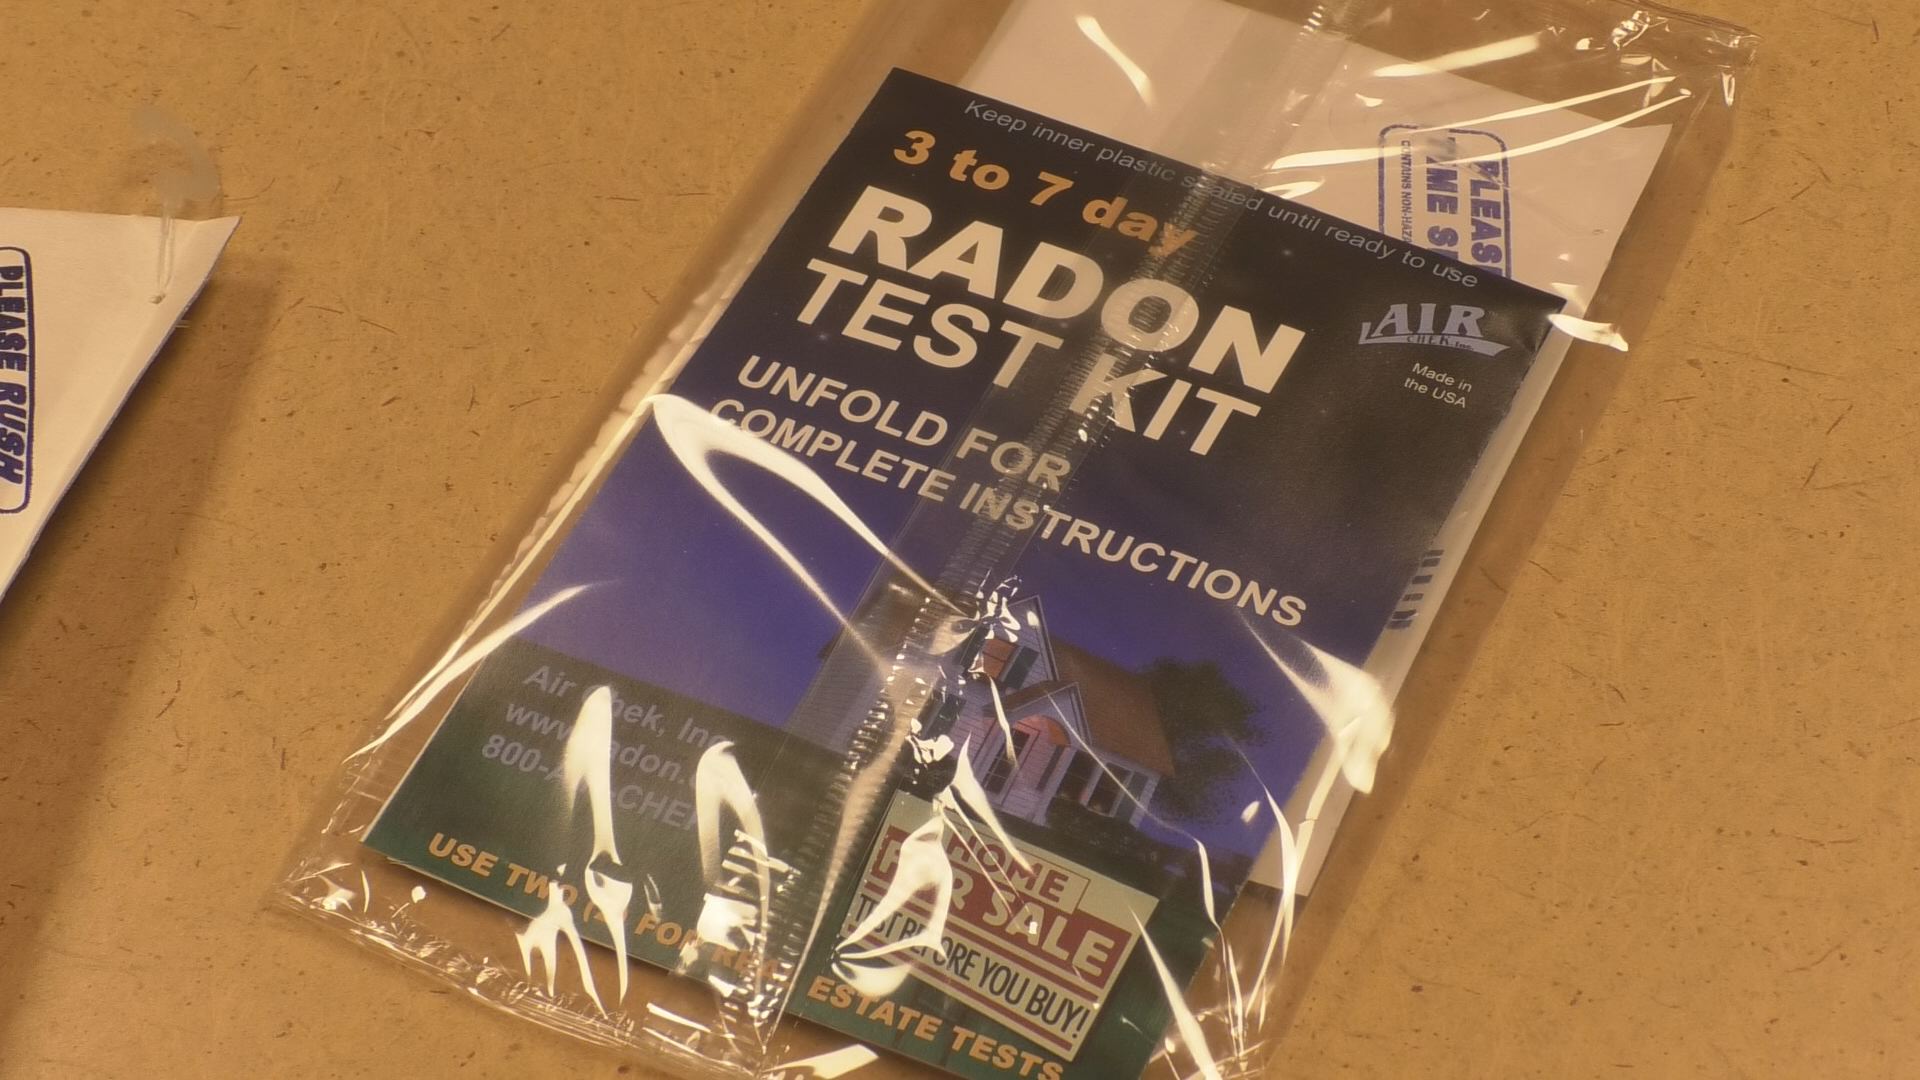 Free radon detection kits available from the state